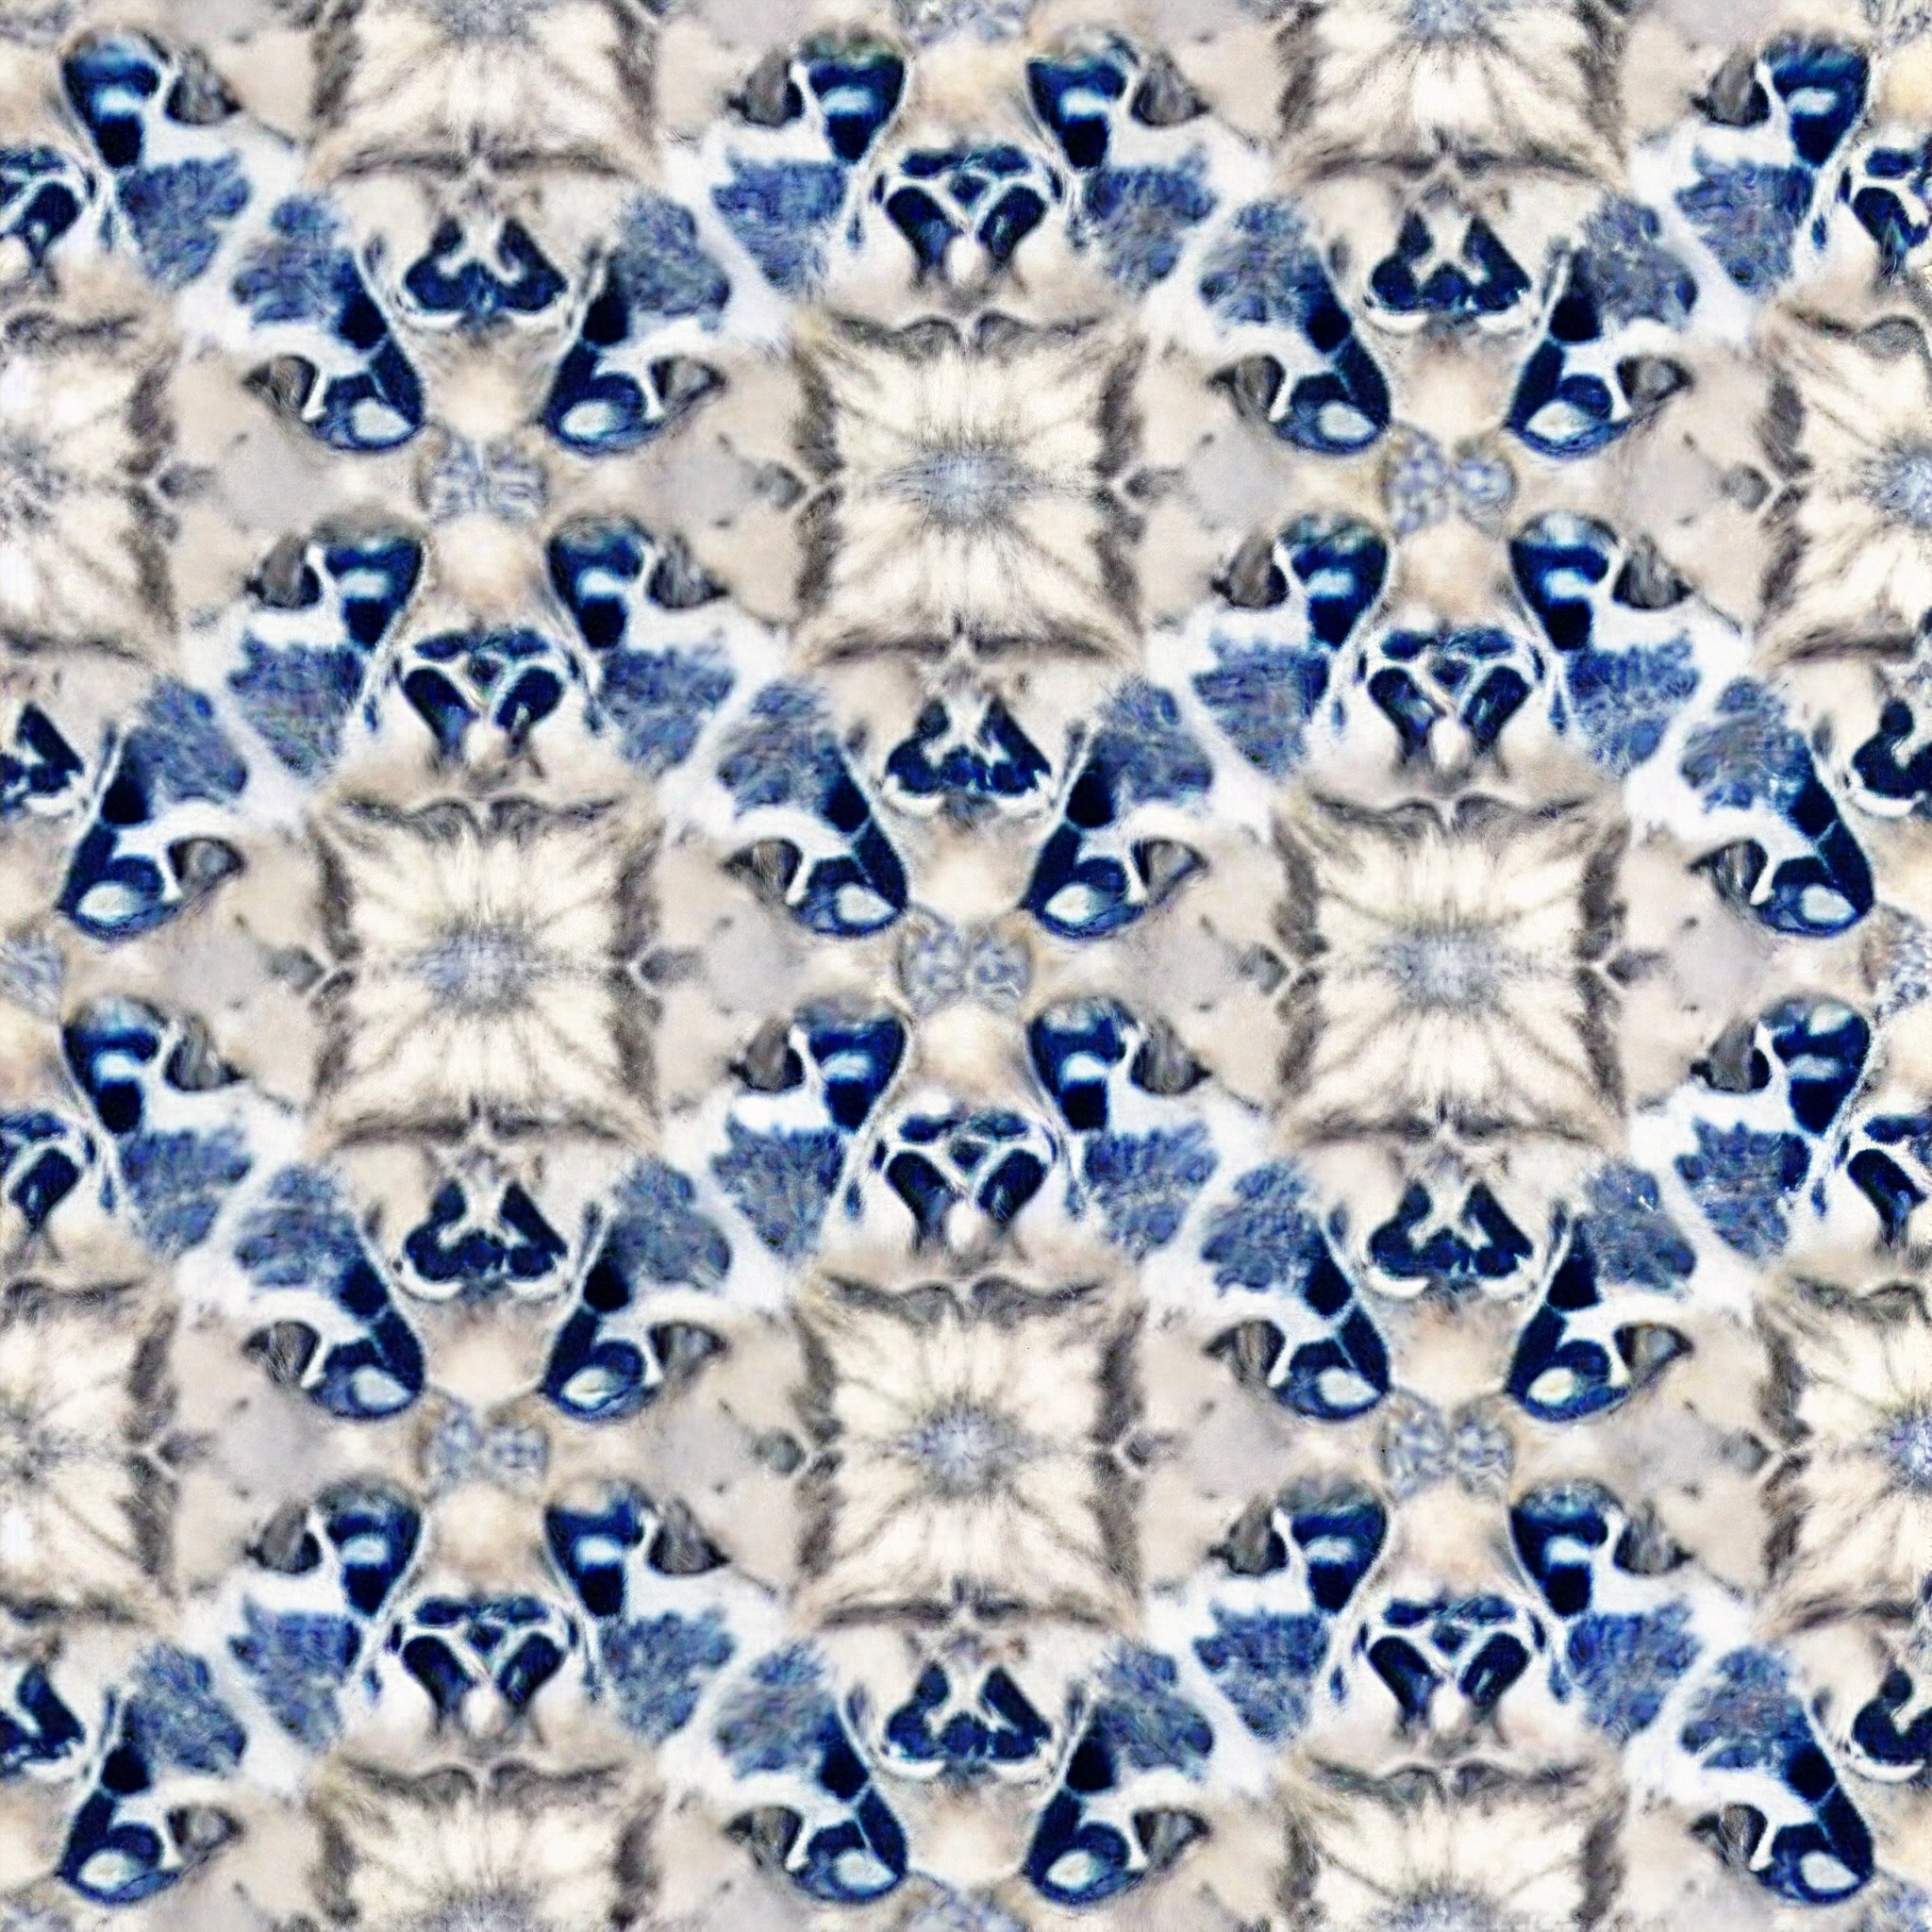 a close up of a blue and white floral pattern on a white background